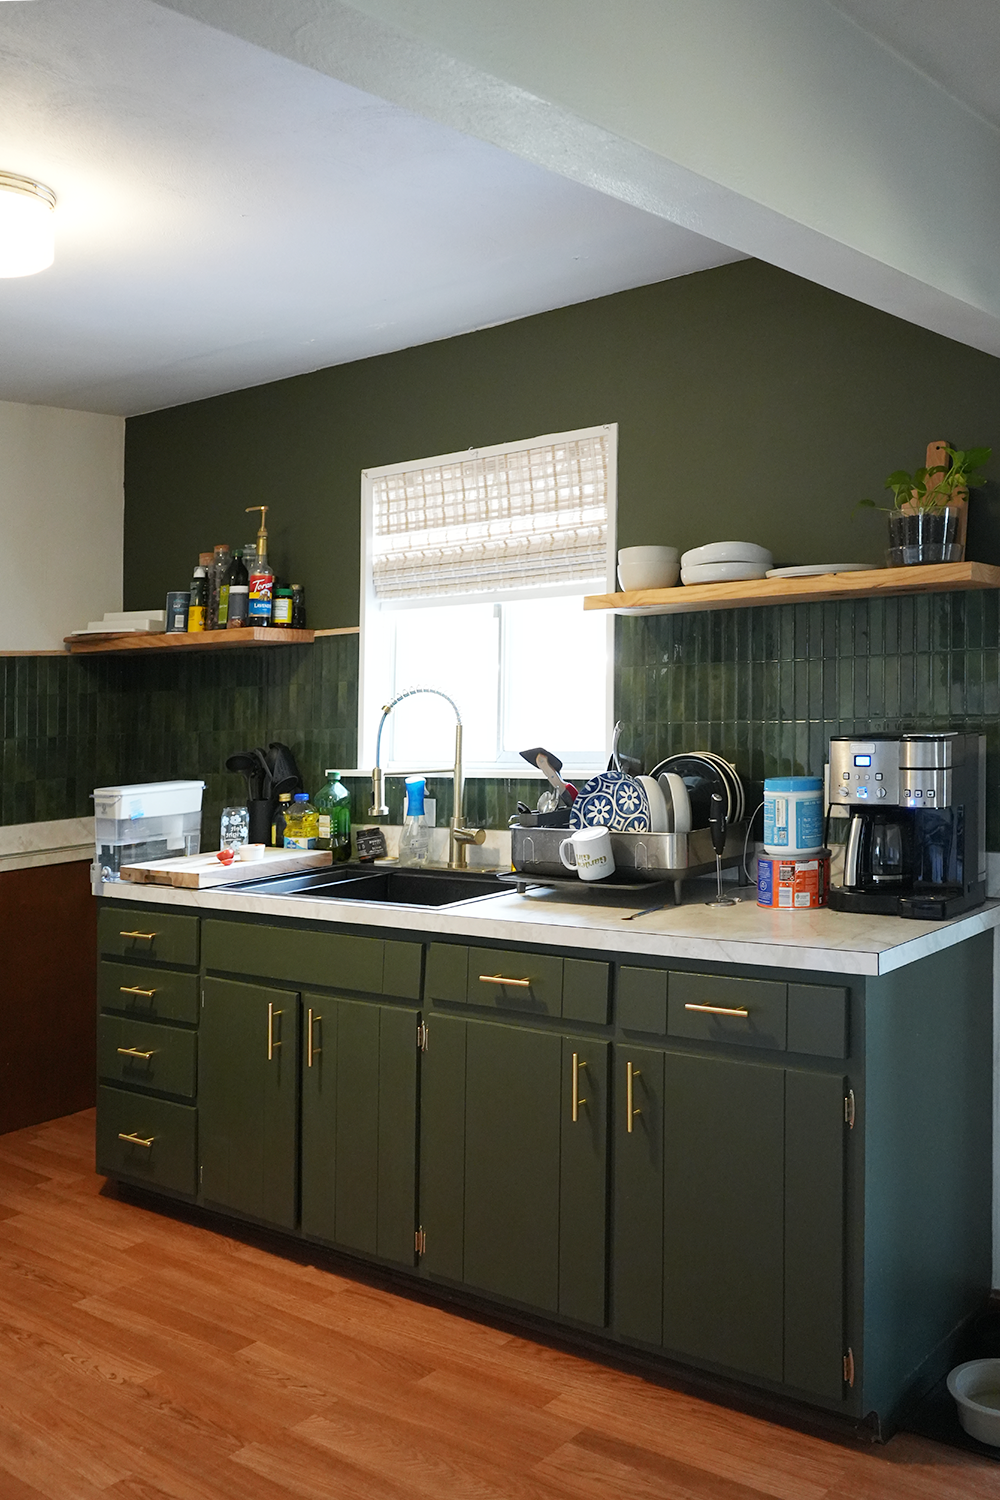 A before photo of Vanessas kitchen and cabinet spaces, with green cabinetry.